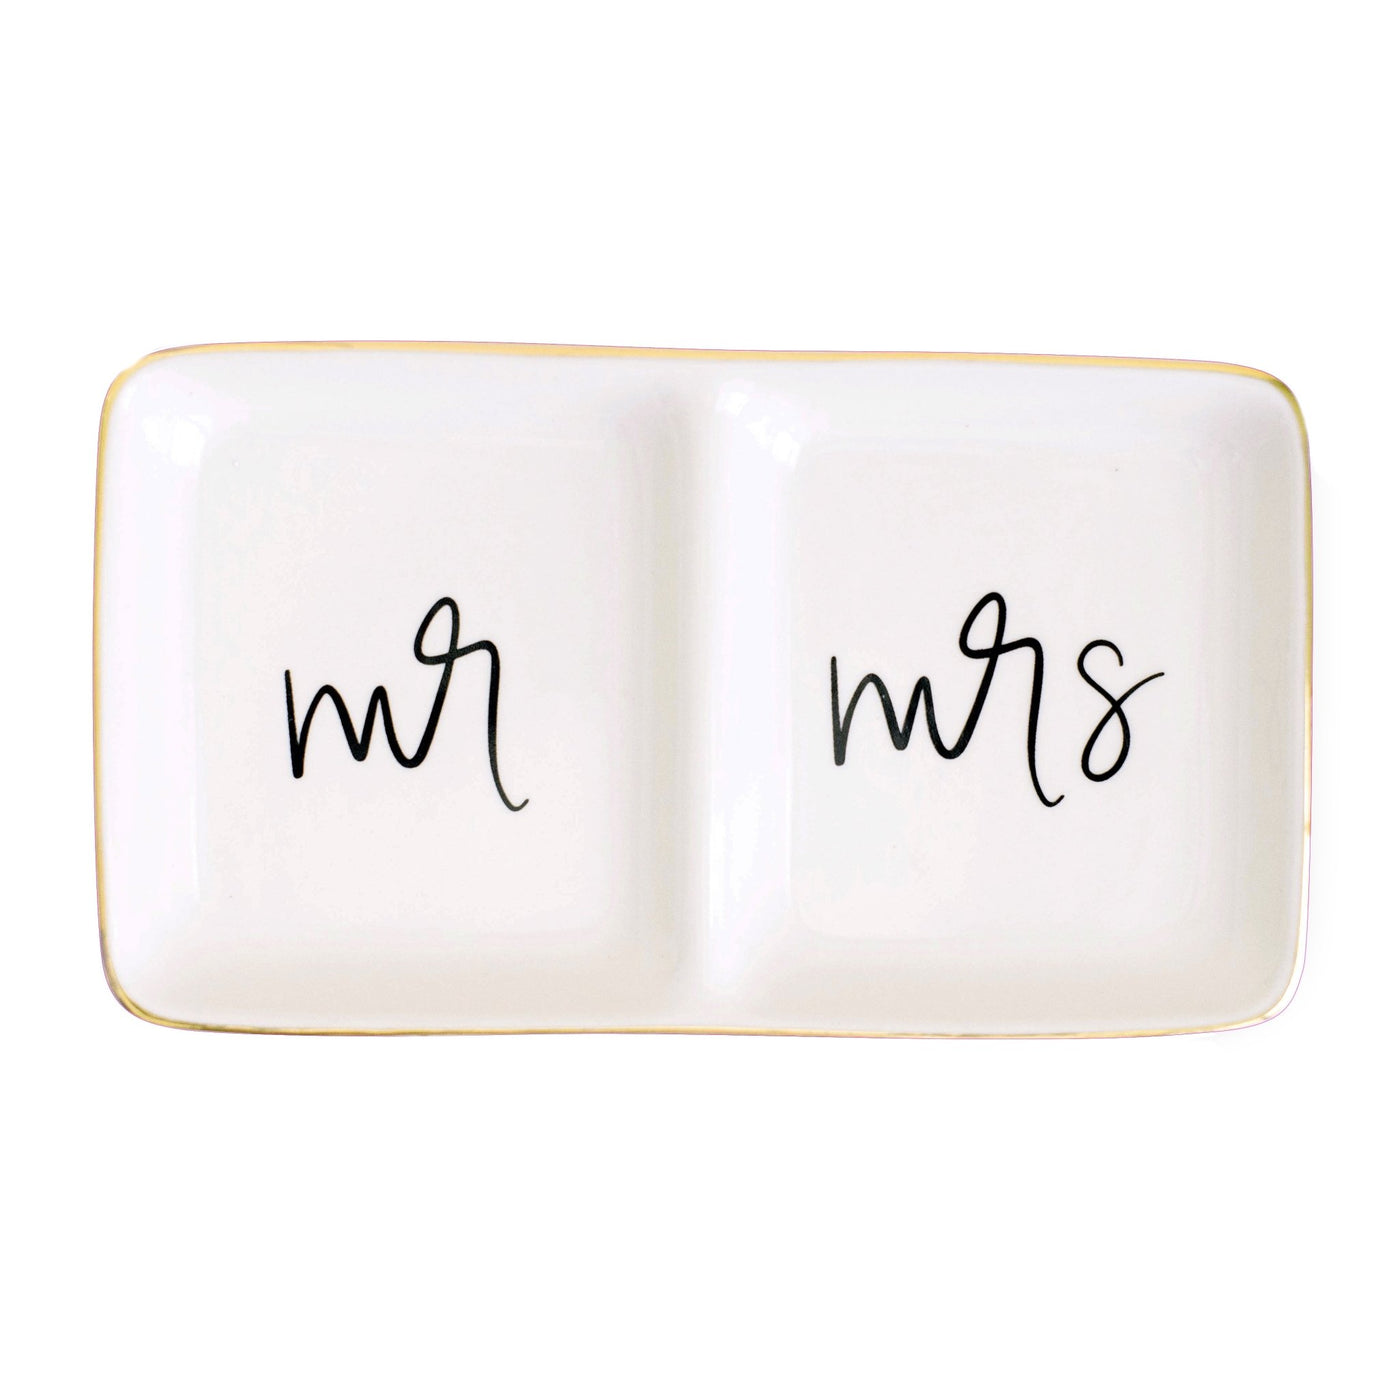 Mr. and Mrs. Jewelry Dish - Sweet Water Decor - Jewelry Dishes